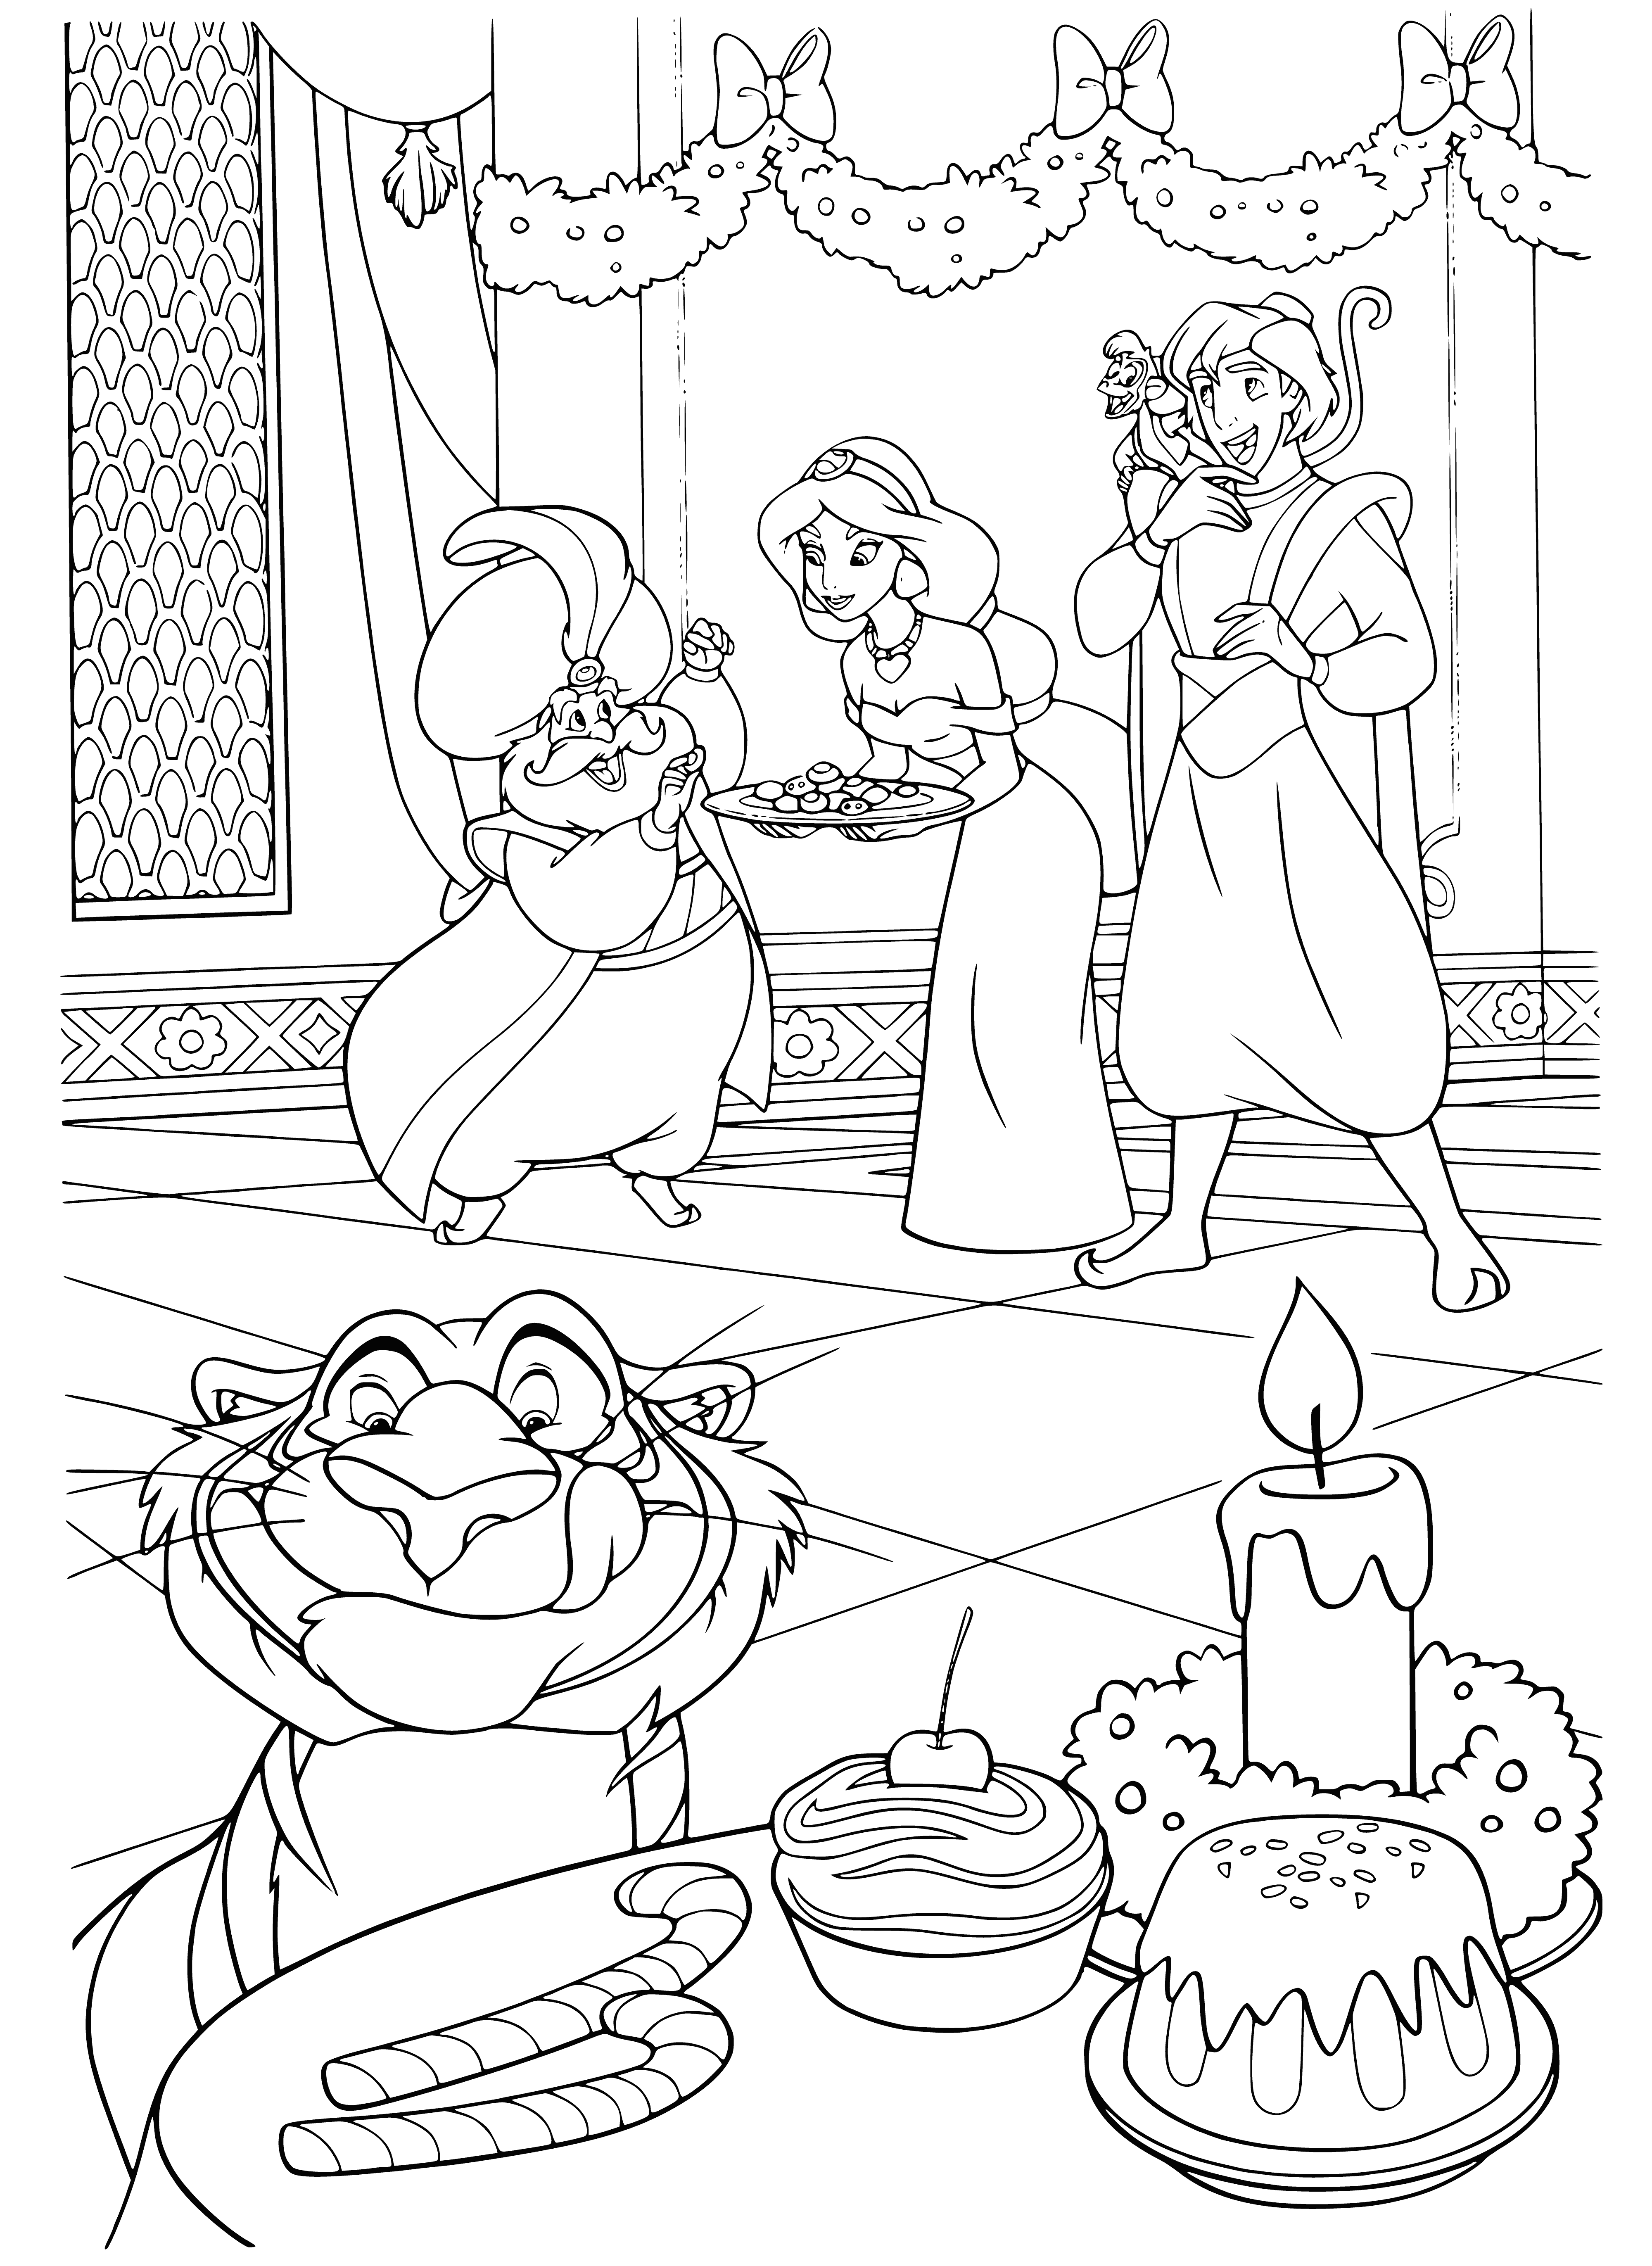 coloring page: Disney princesses celebrate New Year, wearing festive hats & holding items like champagne, horns, clocks, roses, lamps & more!